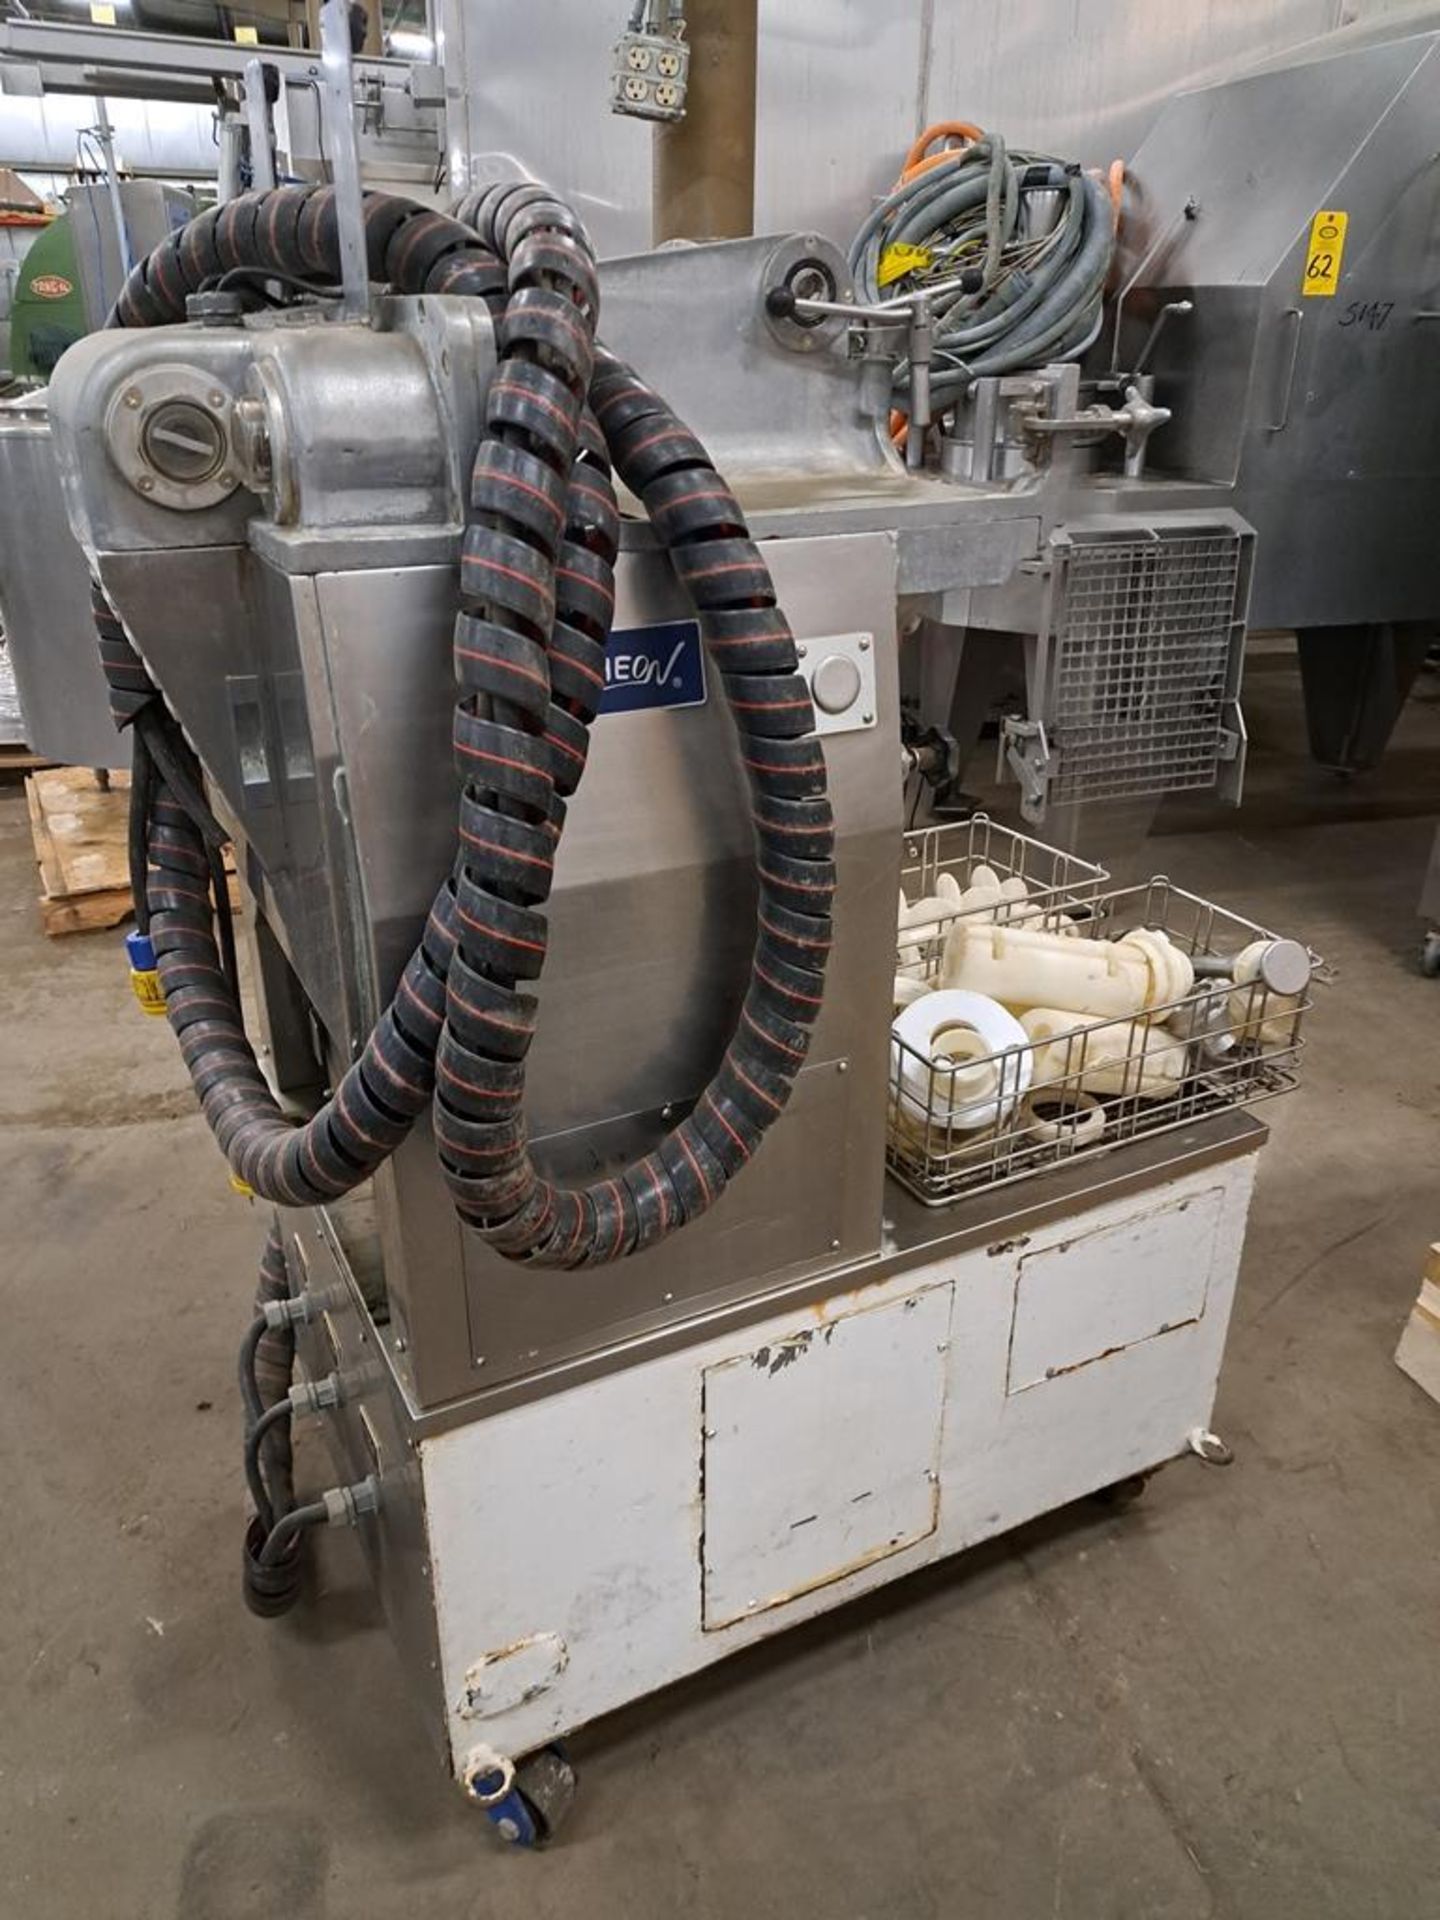 Rheon Mdl. KN200 Cornucopia Encrusting Machine with electrical box controller, 220 volts, 3 phase, - Image 2 of 12